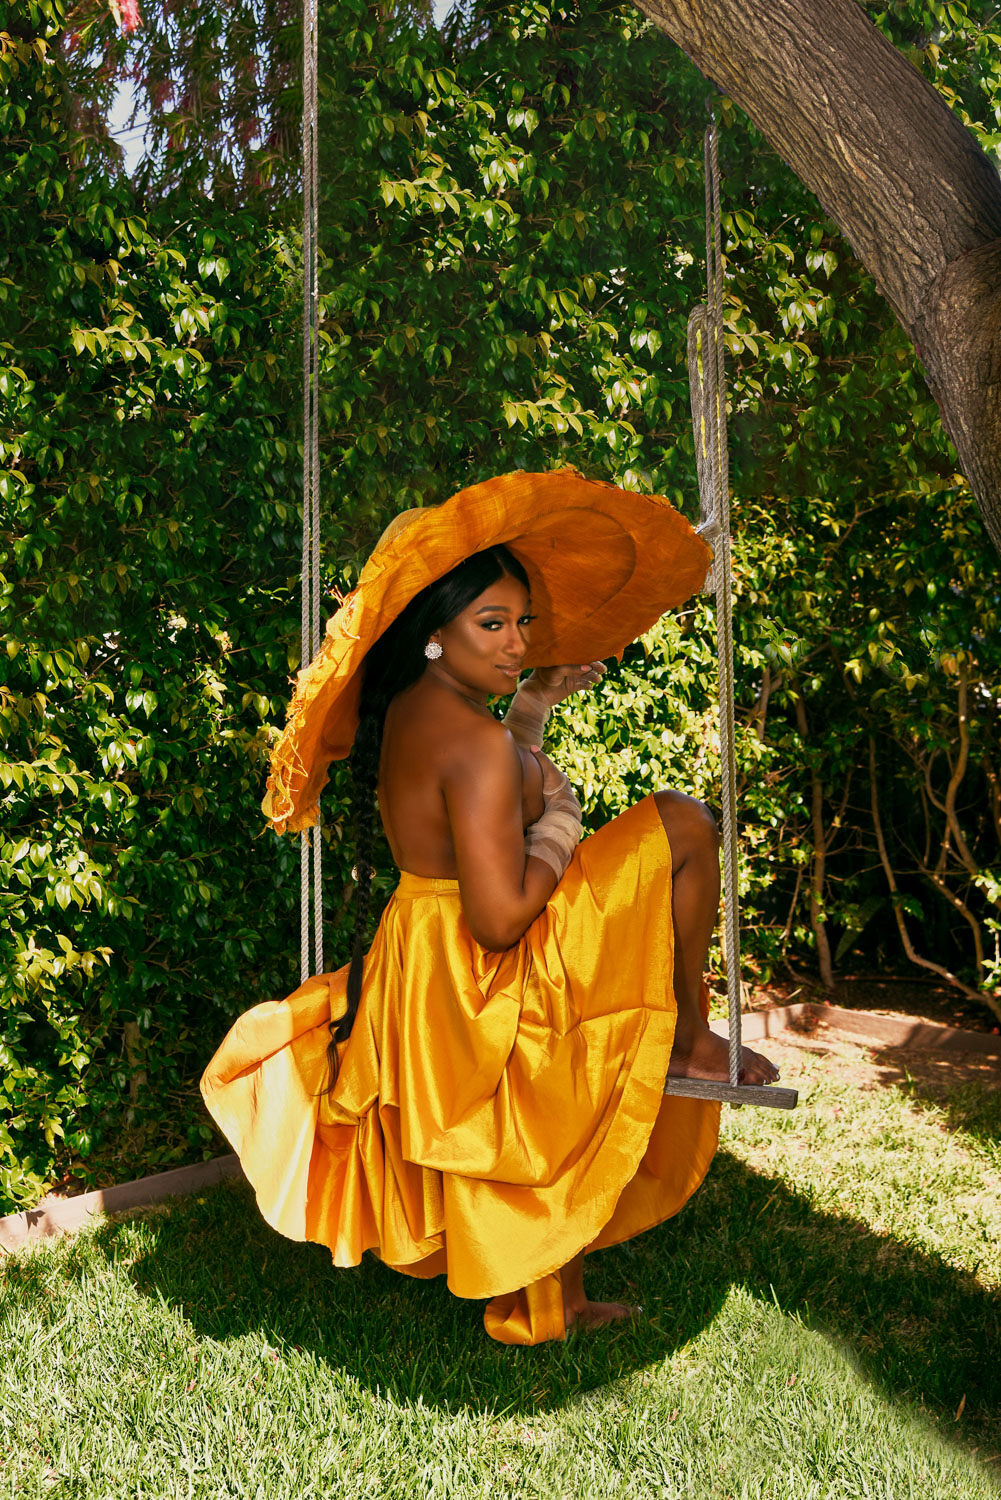 Elle Moxley wearing an orange gown on a swing.